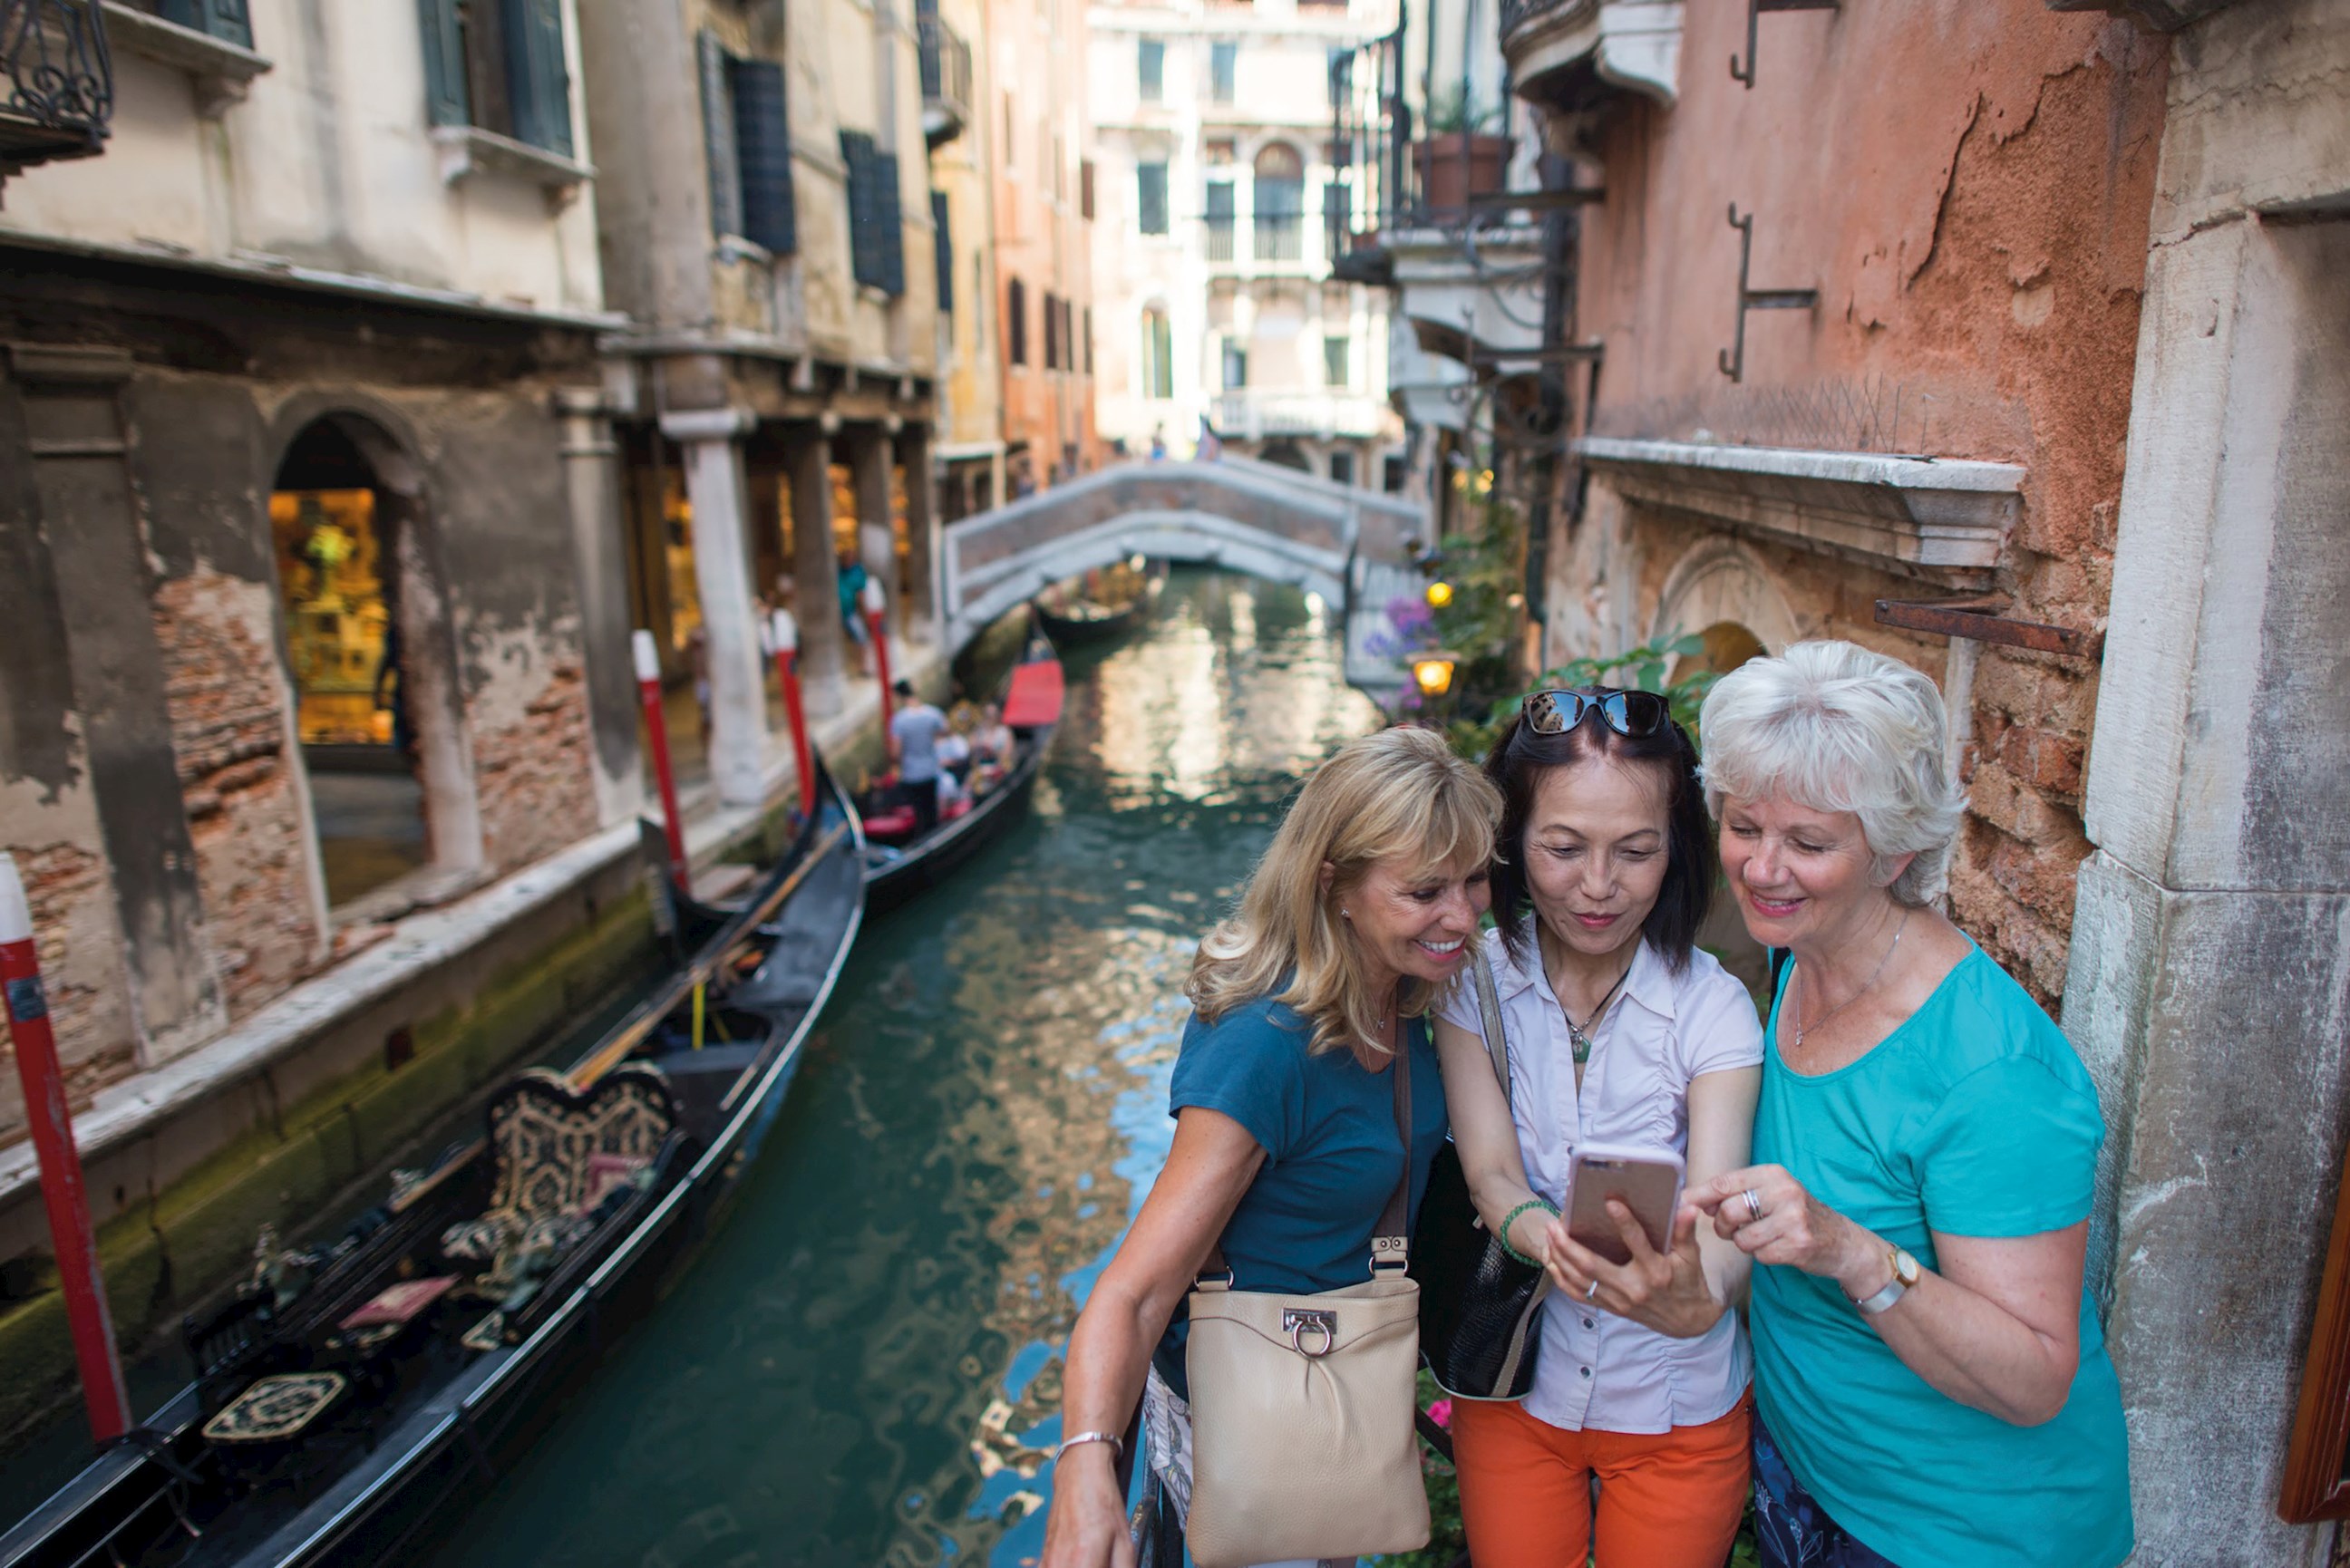 italy guided tour packages including airfare